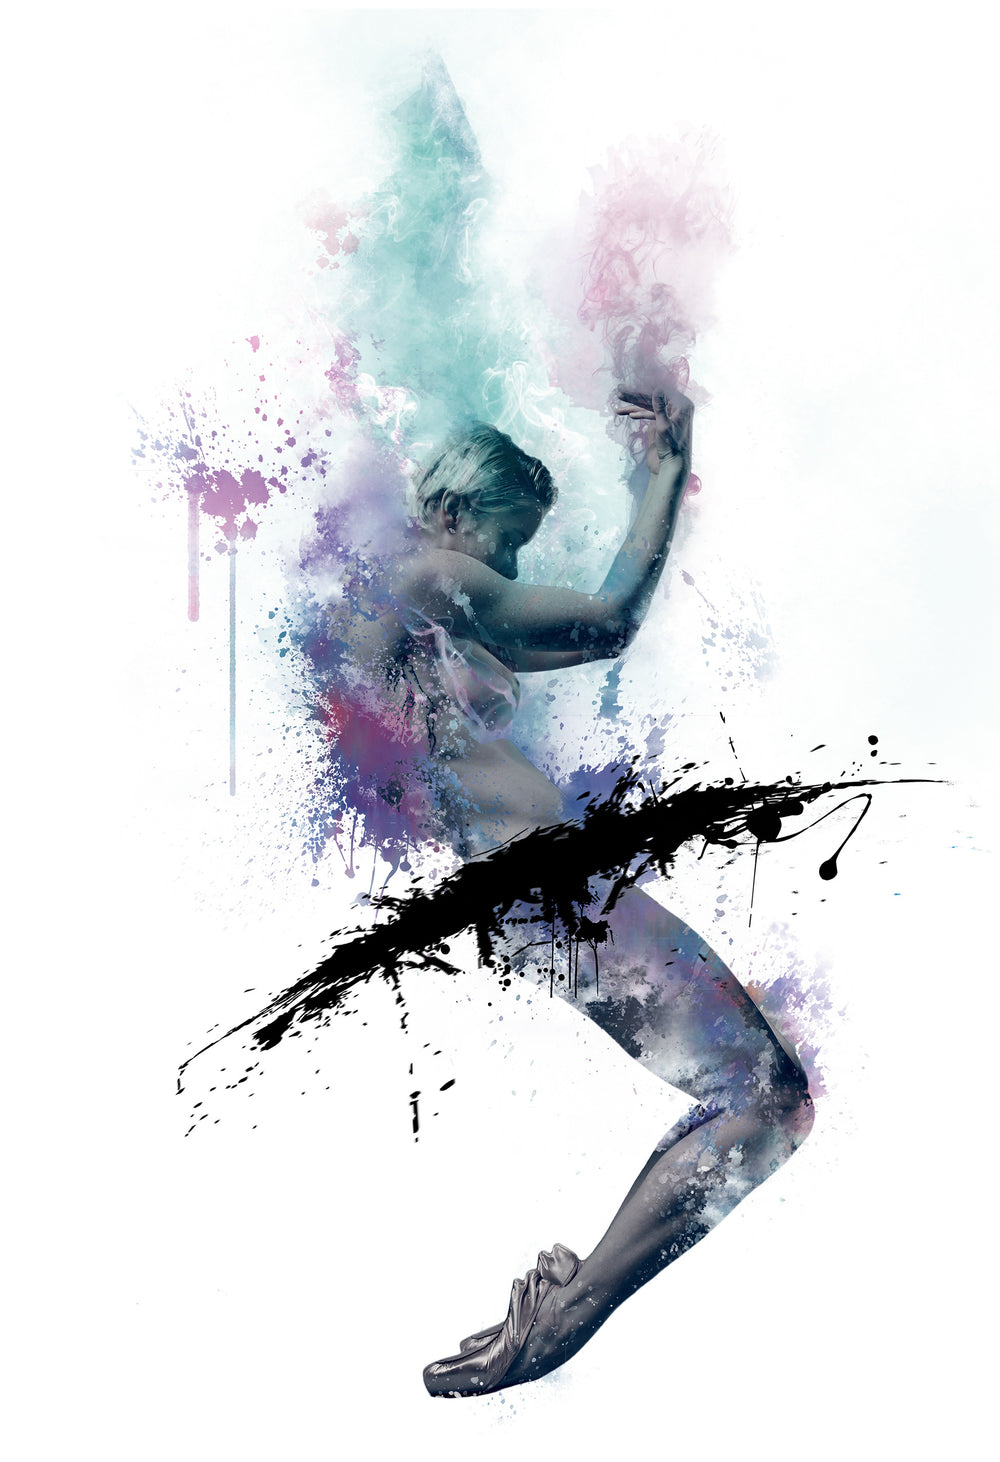 Art Dance Photography Prints - Purchase Online the artwork: Synthesis en-pointe by David Perkins